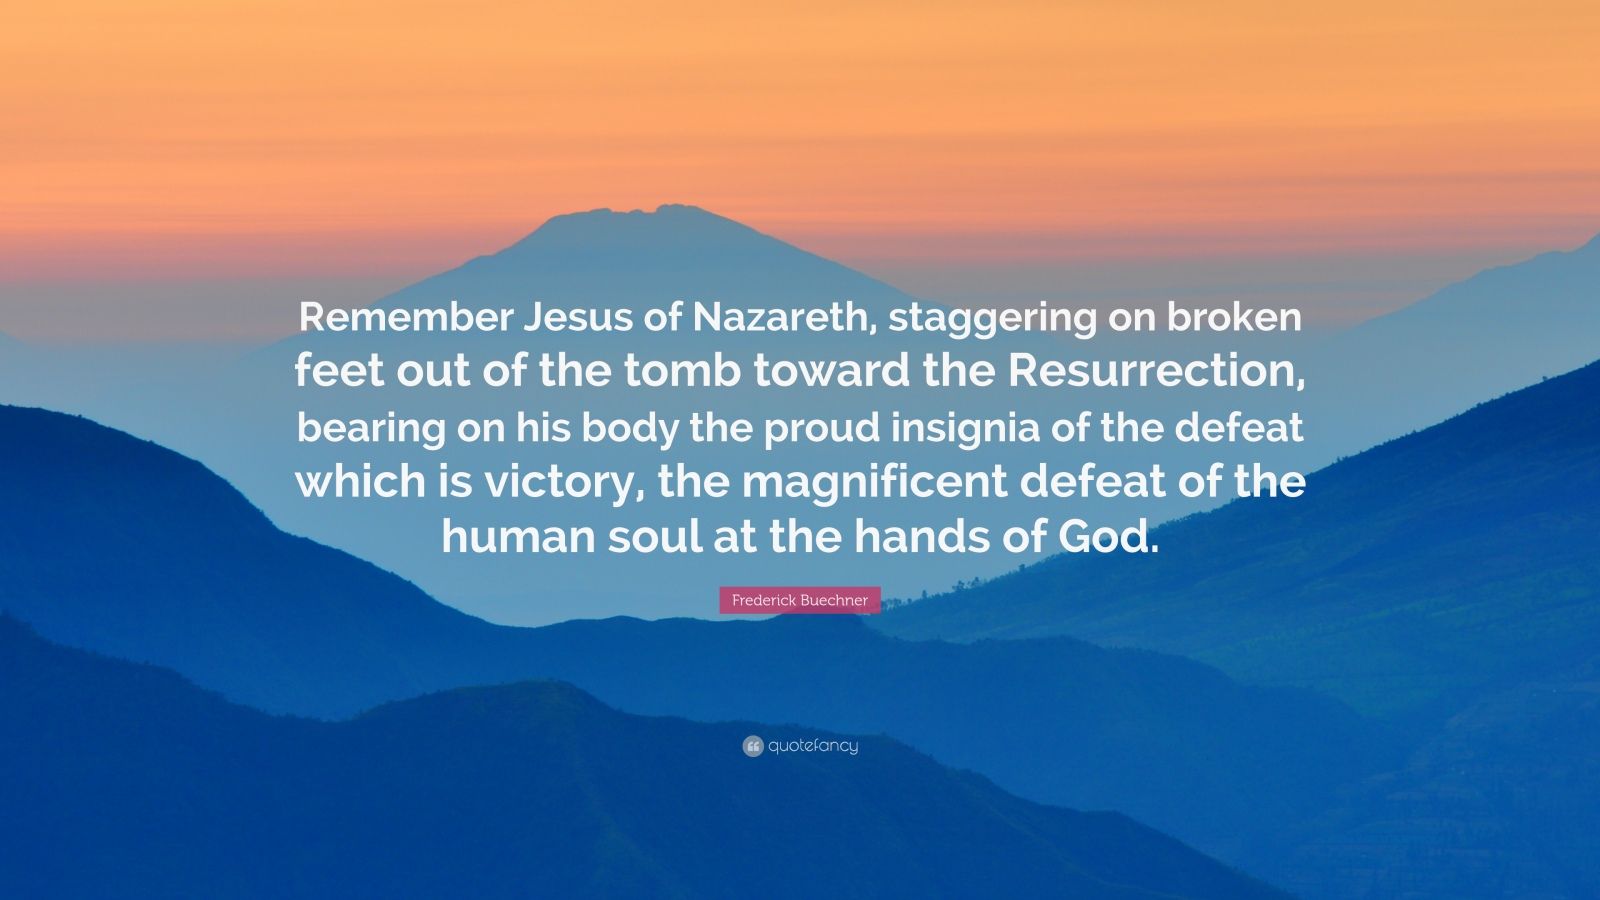 Frederick Buechner Quote: "Remember Jesus of Nazareth, staggering on broken feet out of the tomb ...